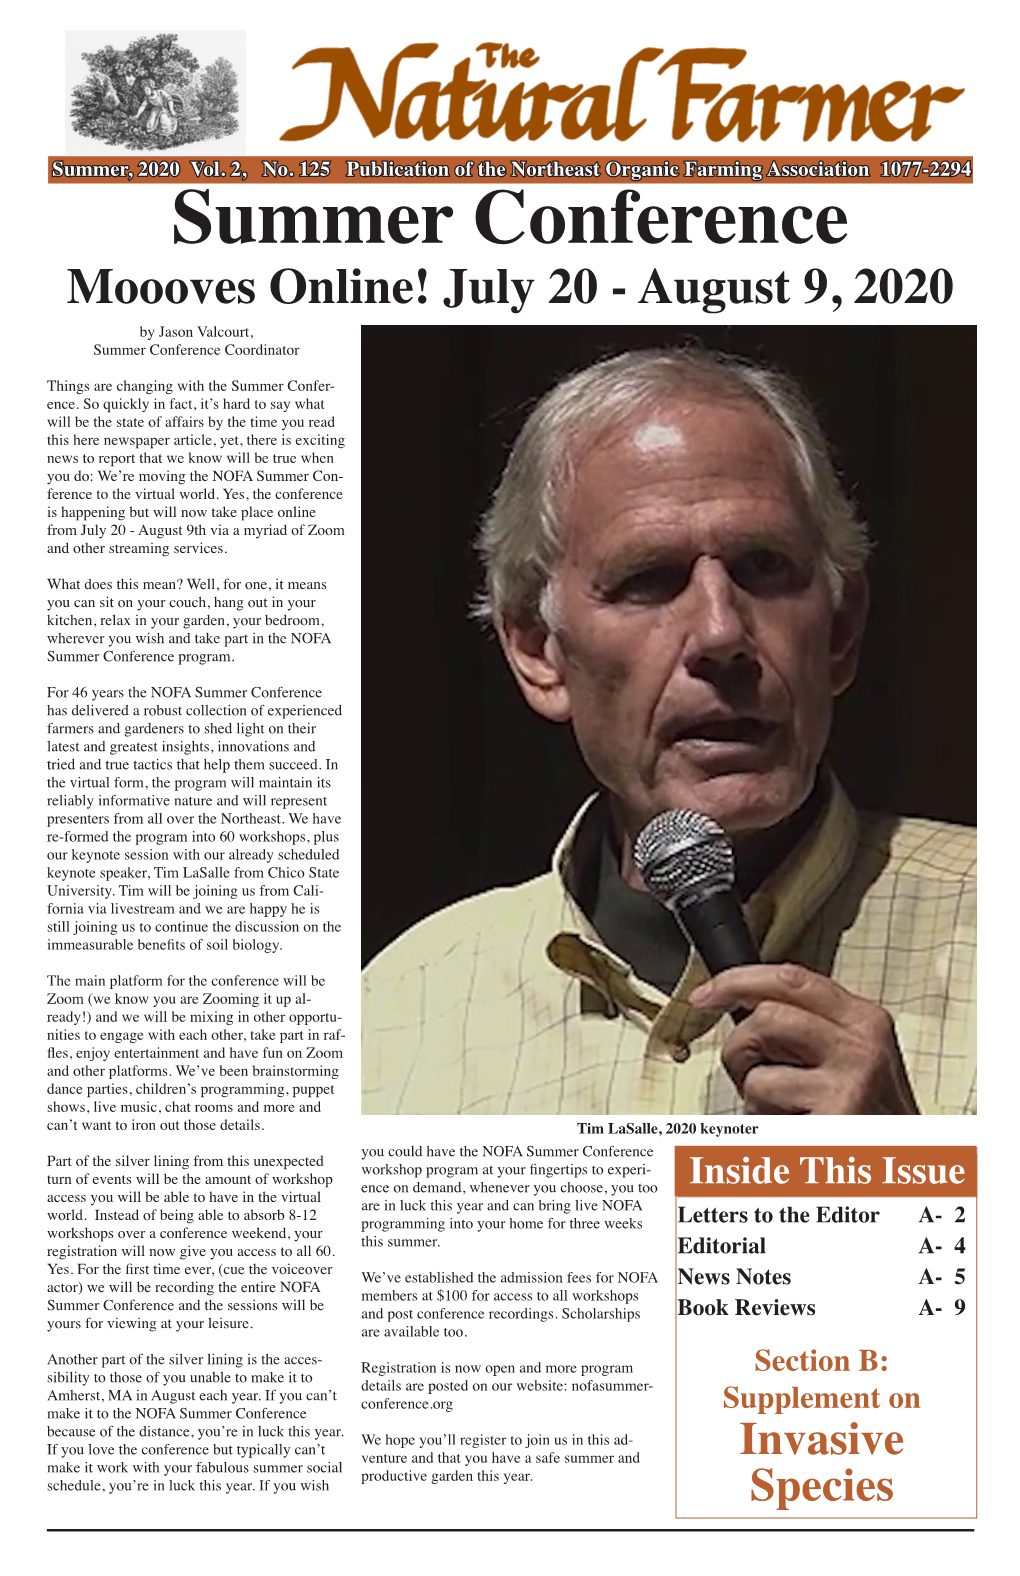 Summer Conference Moooves Online! July 20 - August 9, 2020 by Jason Valcourt, Summer Conference Coordinator